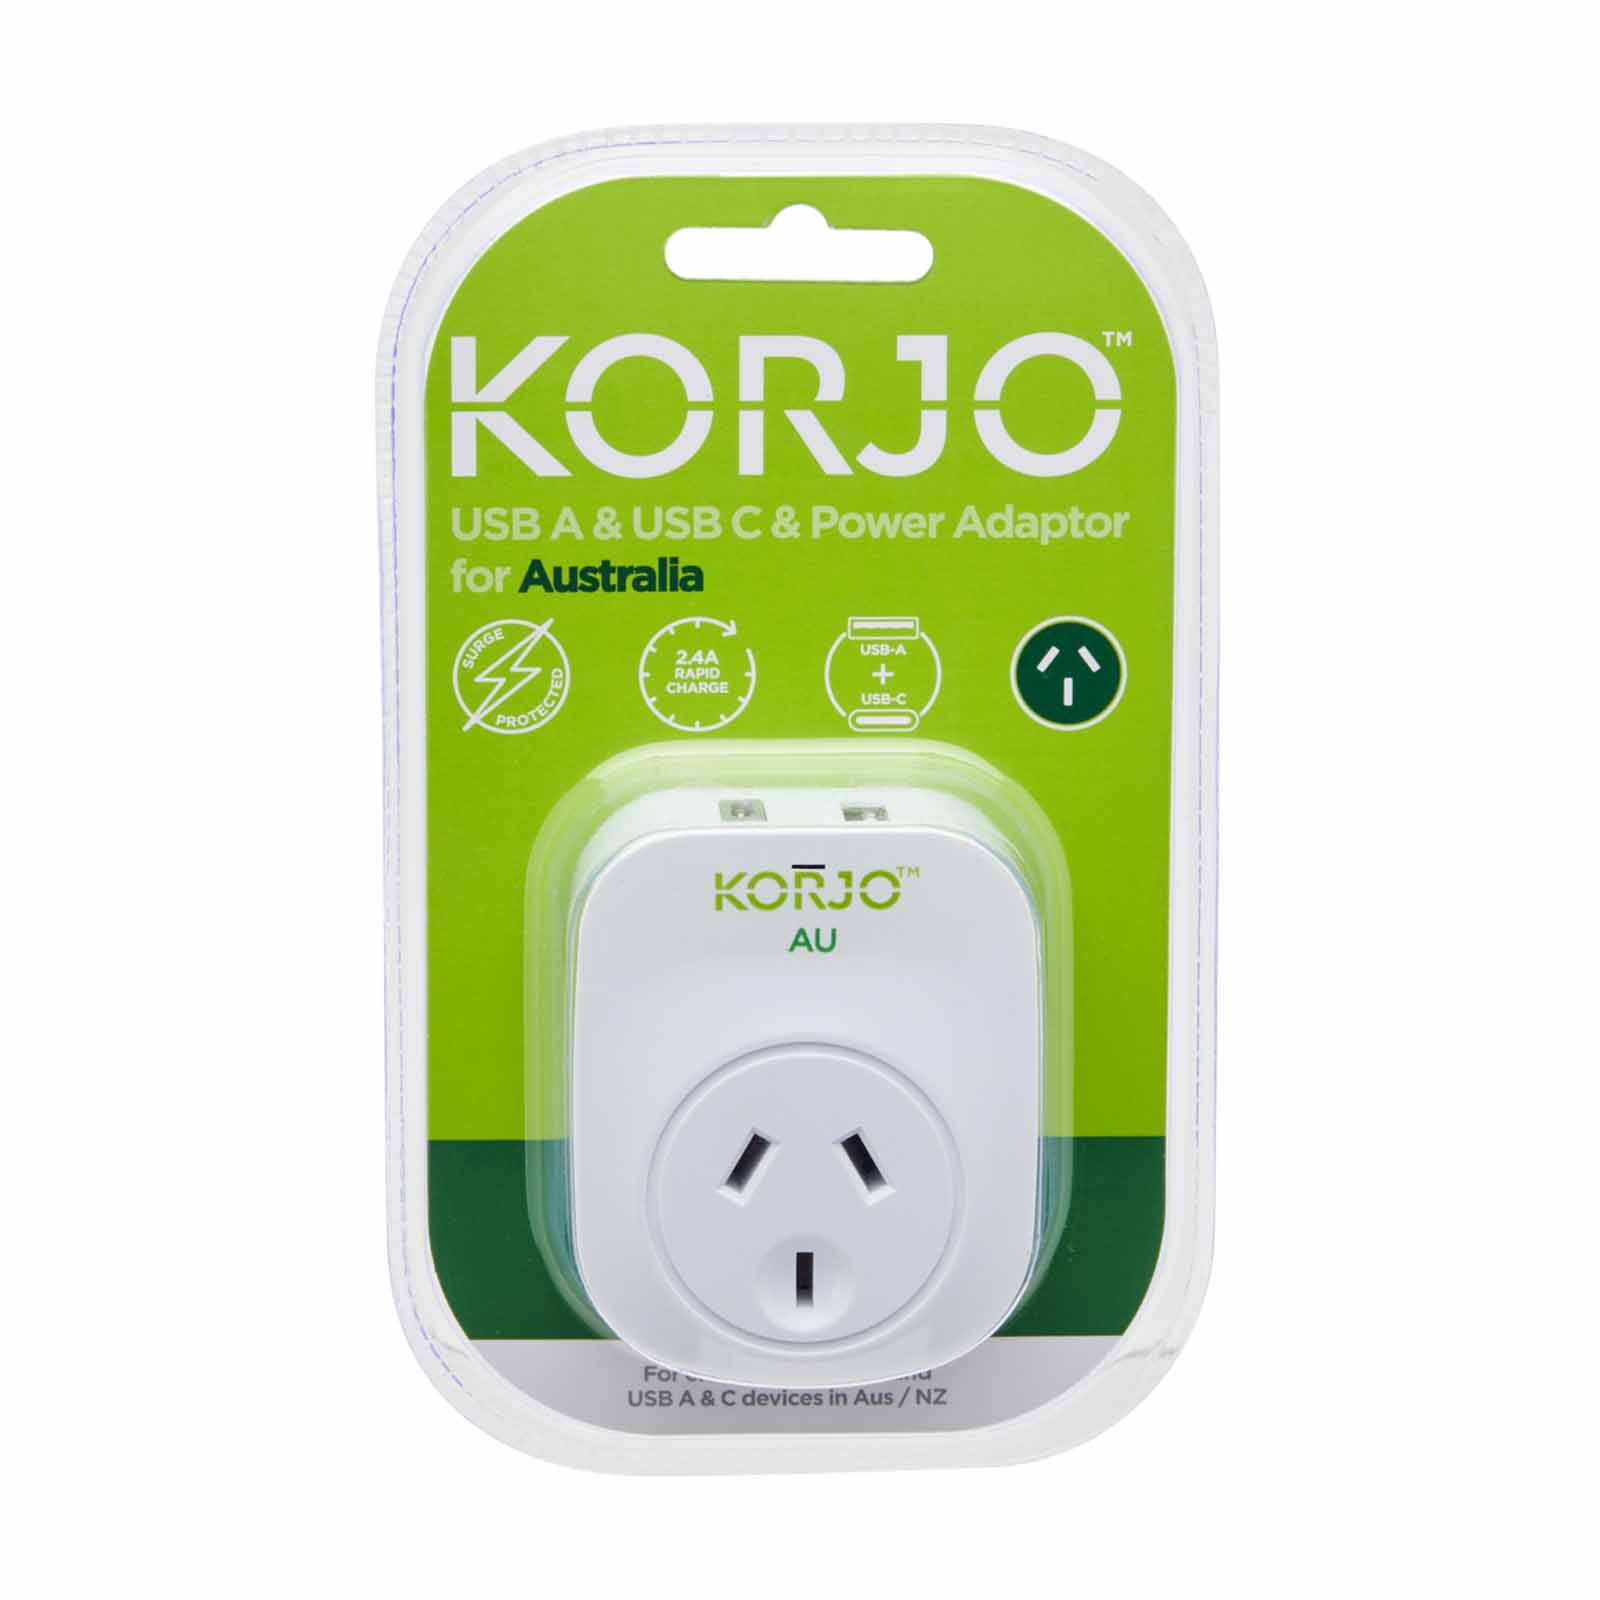 Korjo-Travel-Adaptor-Usb-Port-A-And-C-For-Australia-Package